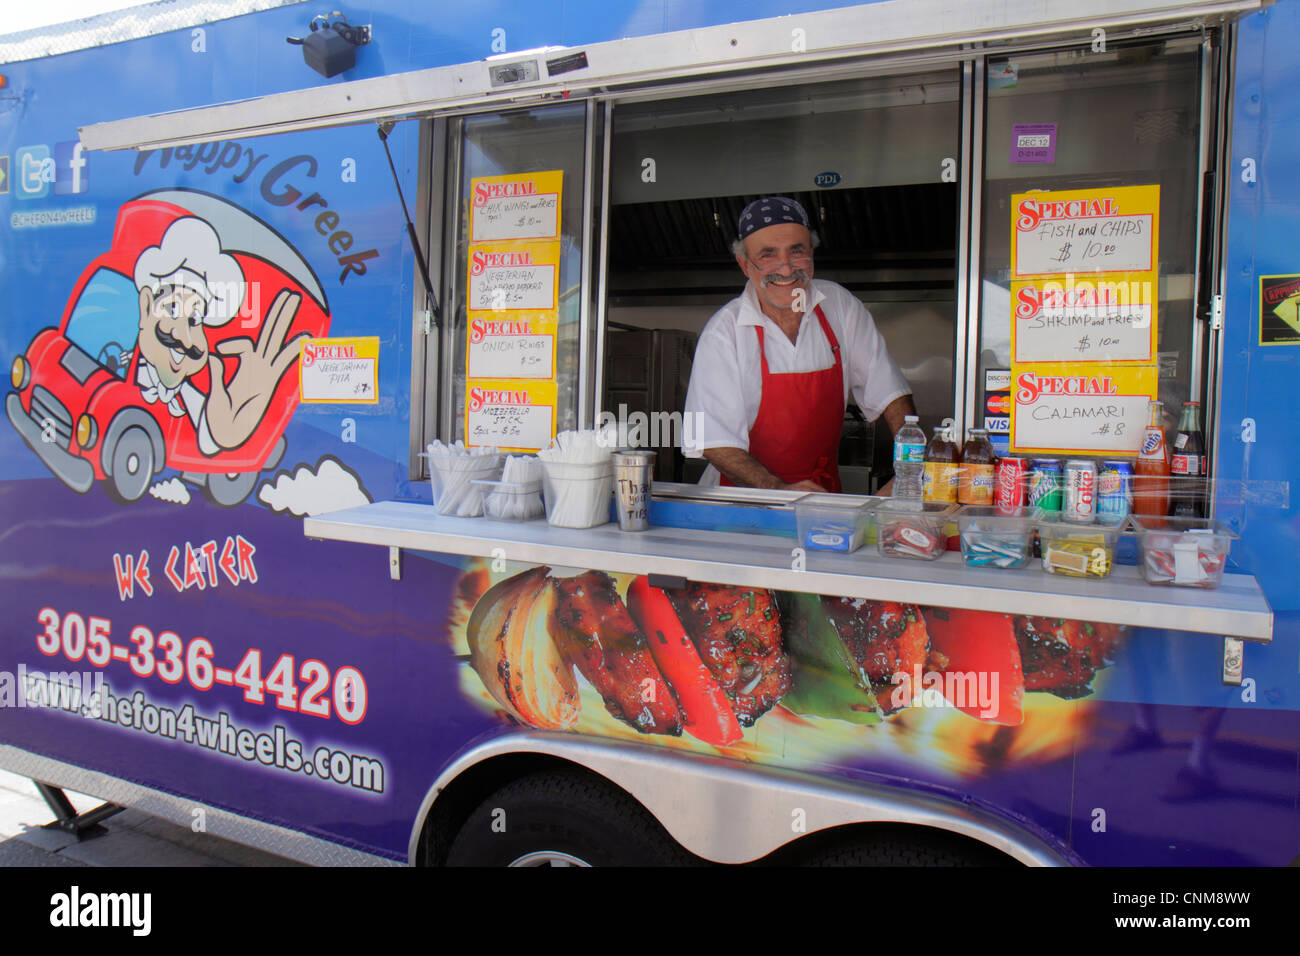 Miami Florida,Hialeah,Palm Avenue,Art on Palm,fair,festival,food truck,Greek,man men male adult adults,food,mobile small business,owner,smiling,happy, Stock Photo